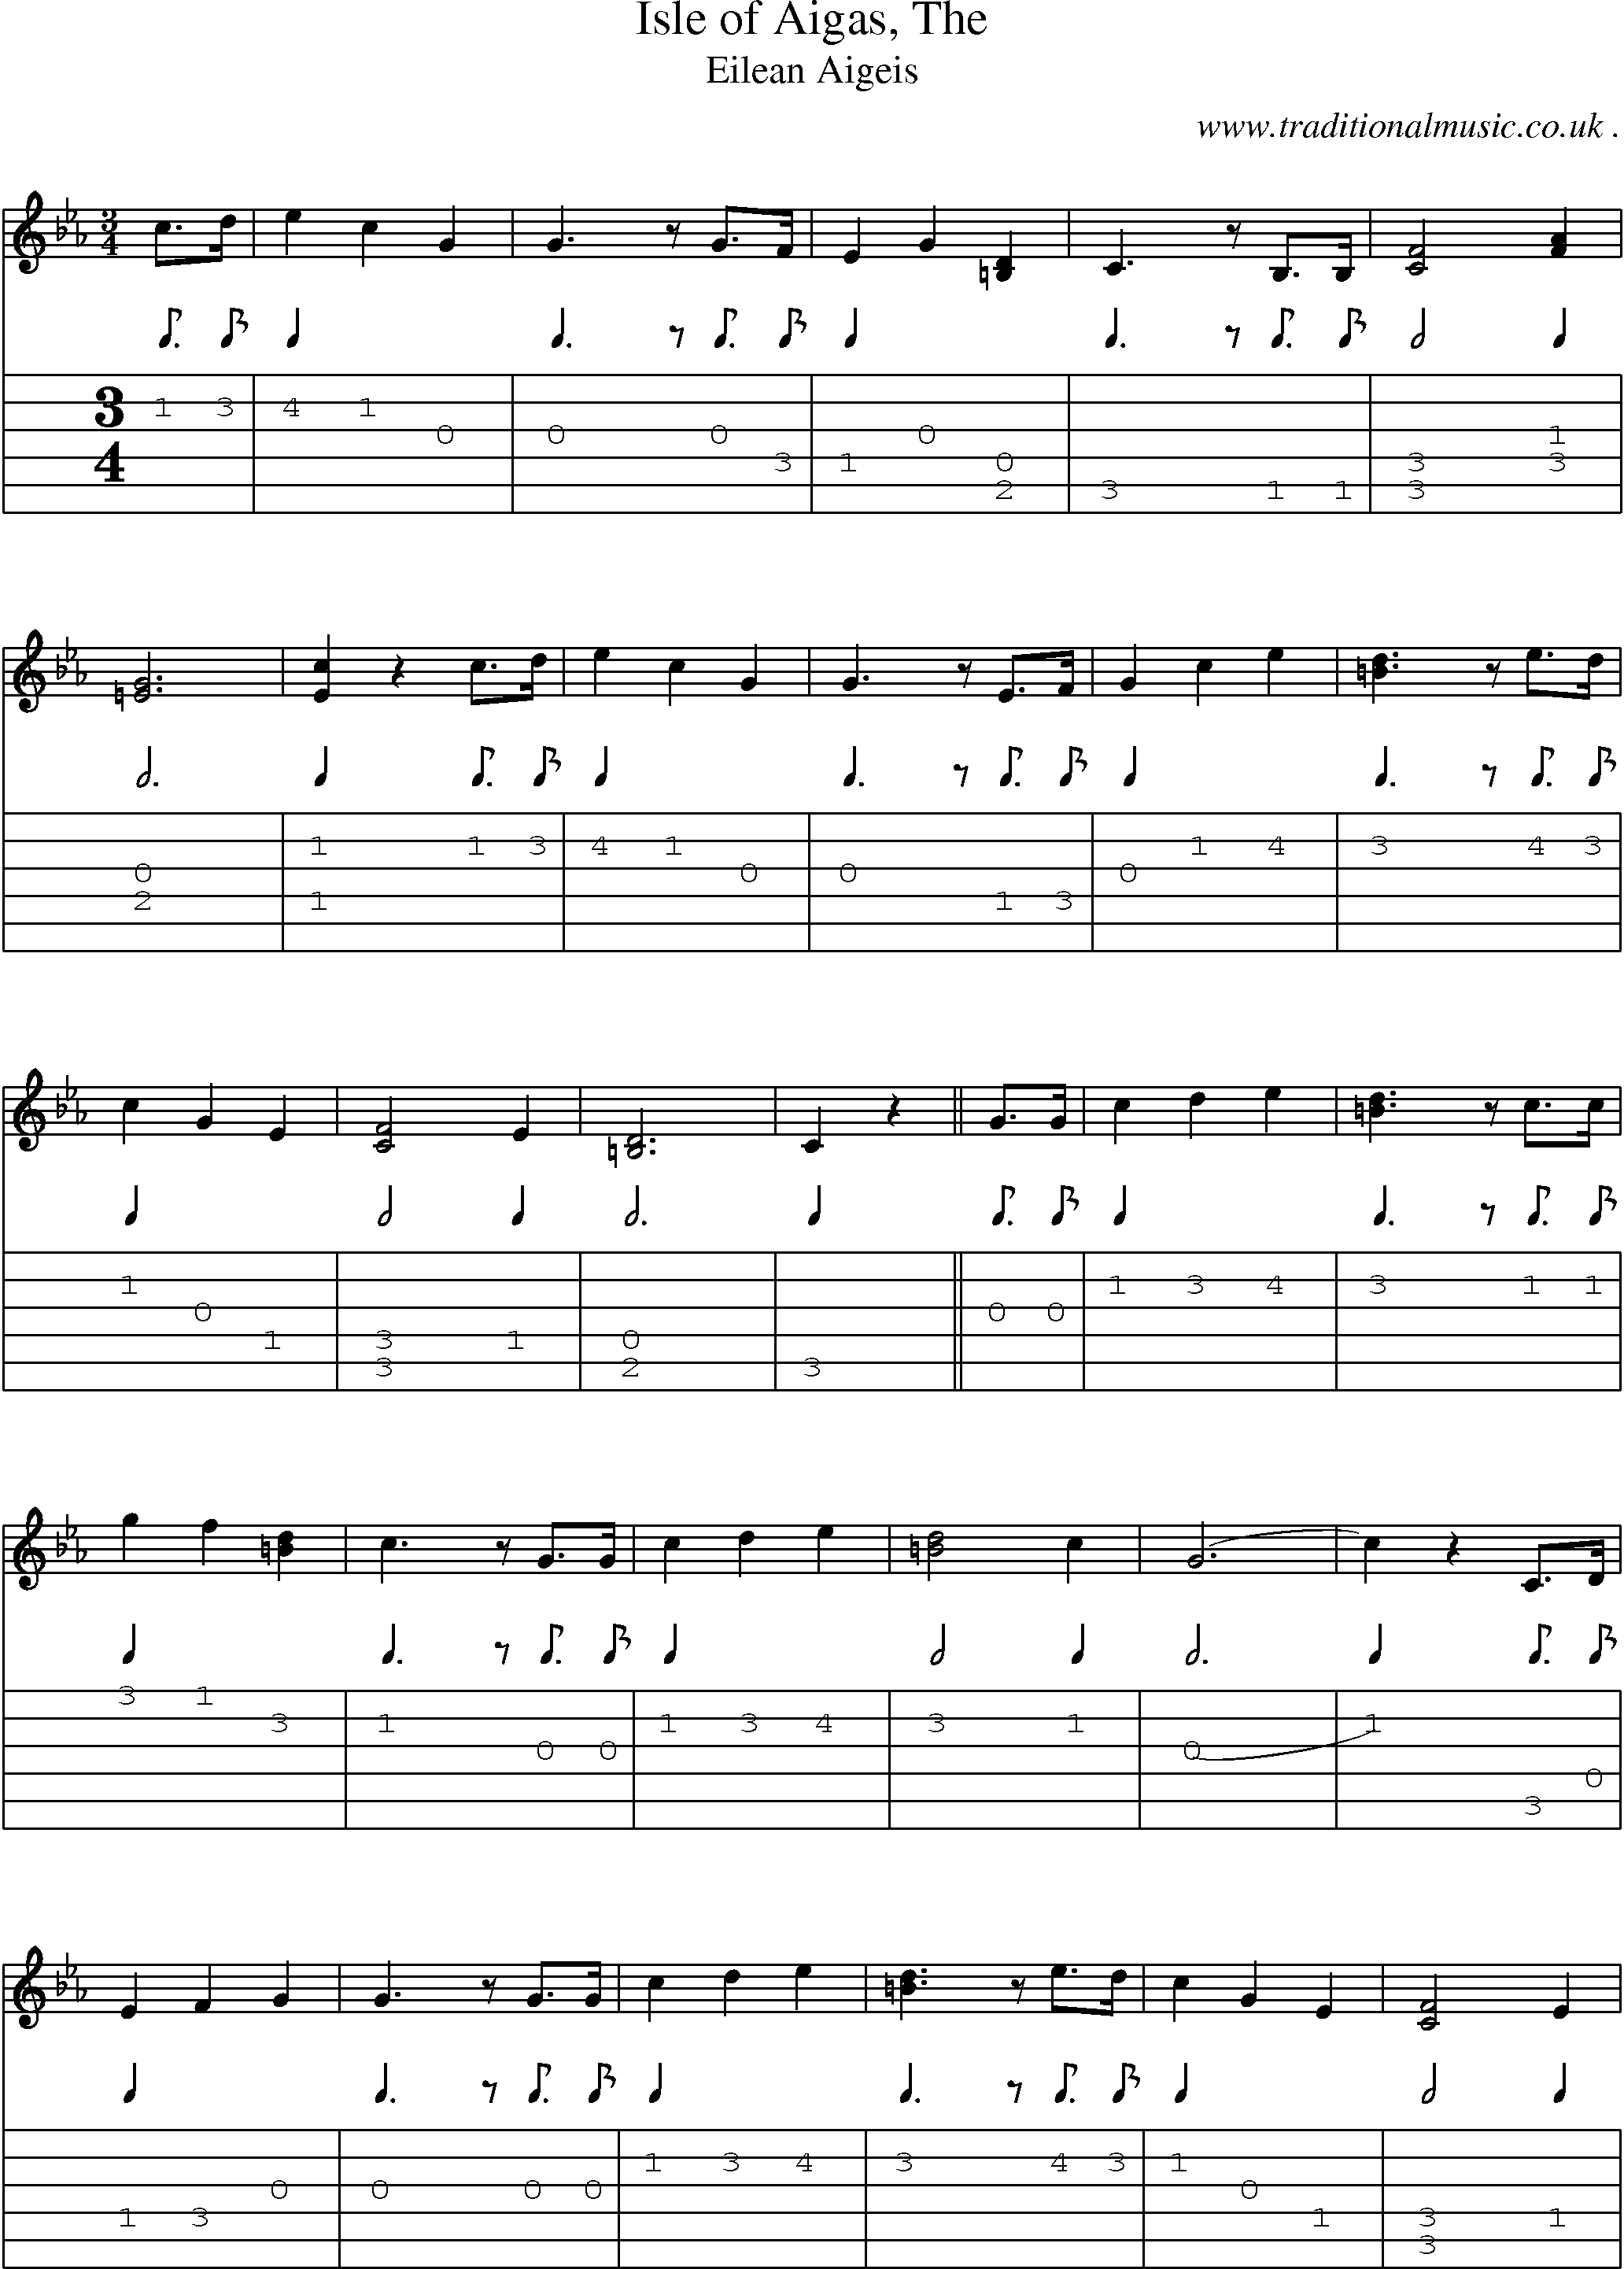 Sheet-music  score, Chords and Guitar Tabs for Isle Of Aigas The